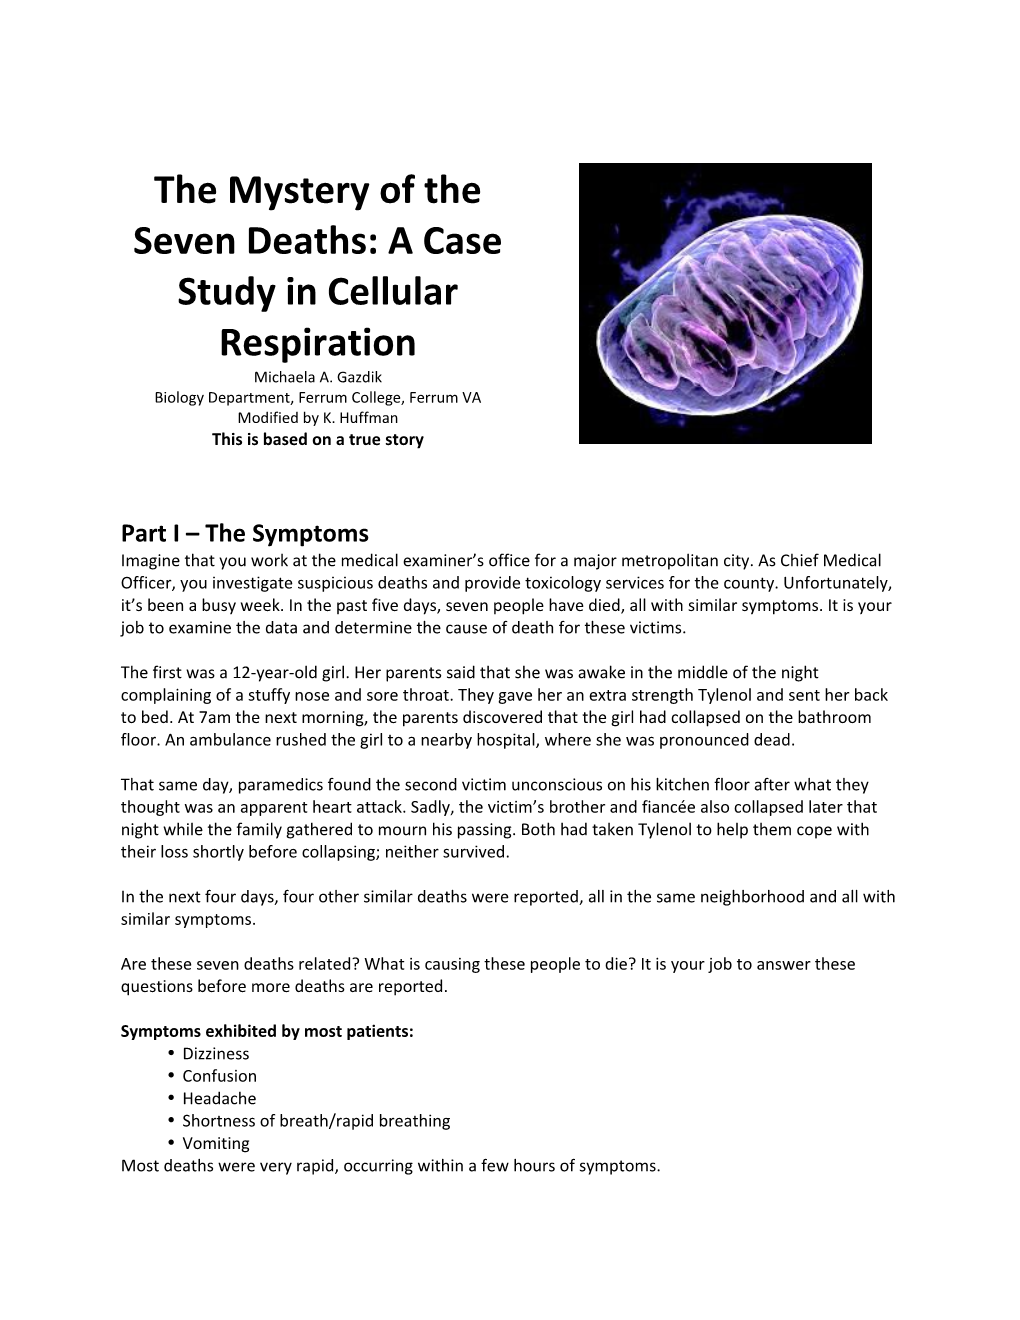 The Mystery of Theseven Deaths:A Case Study Incellular Respiration